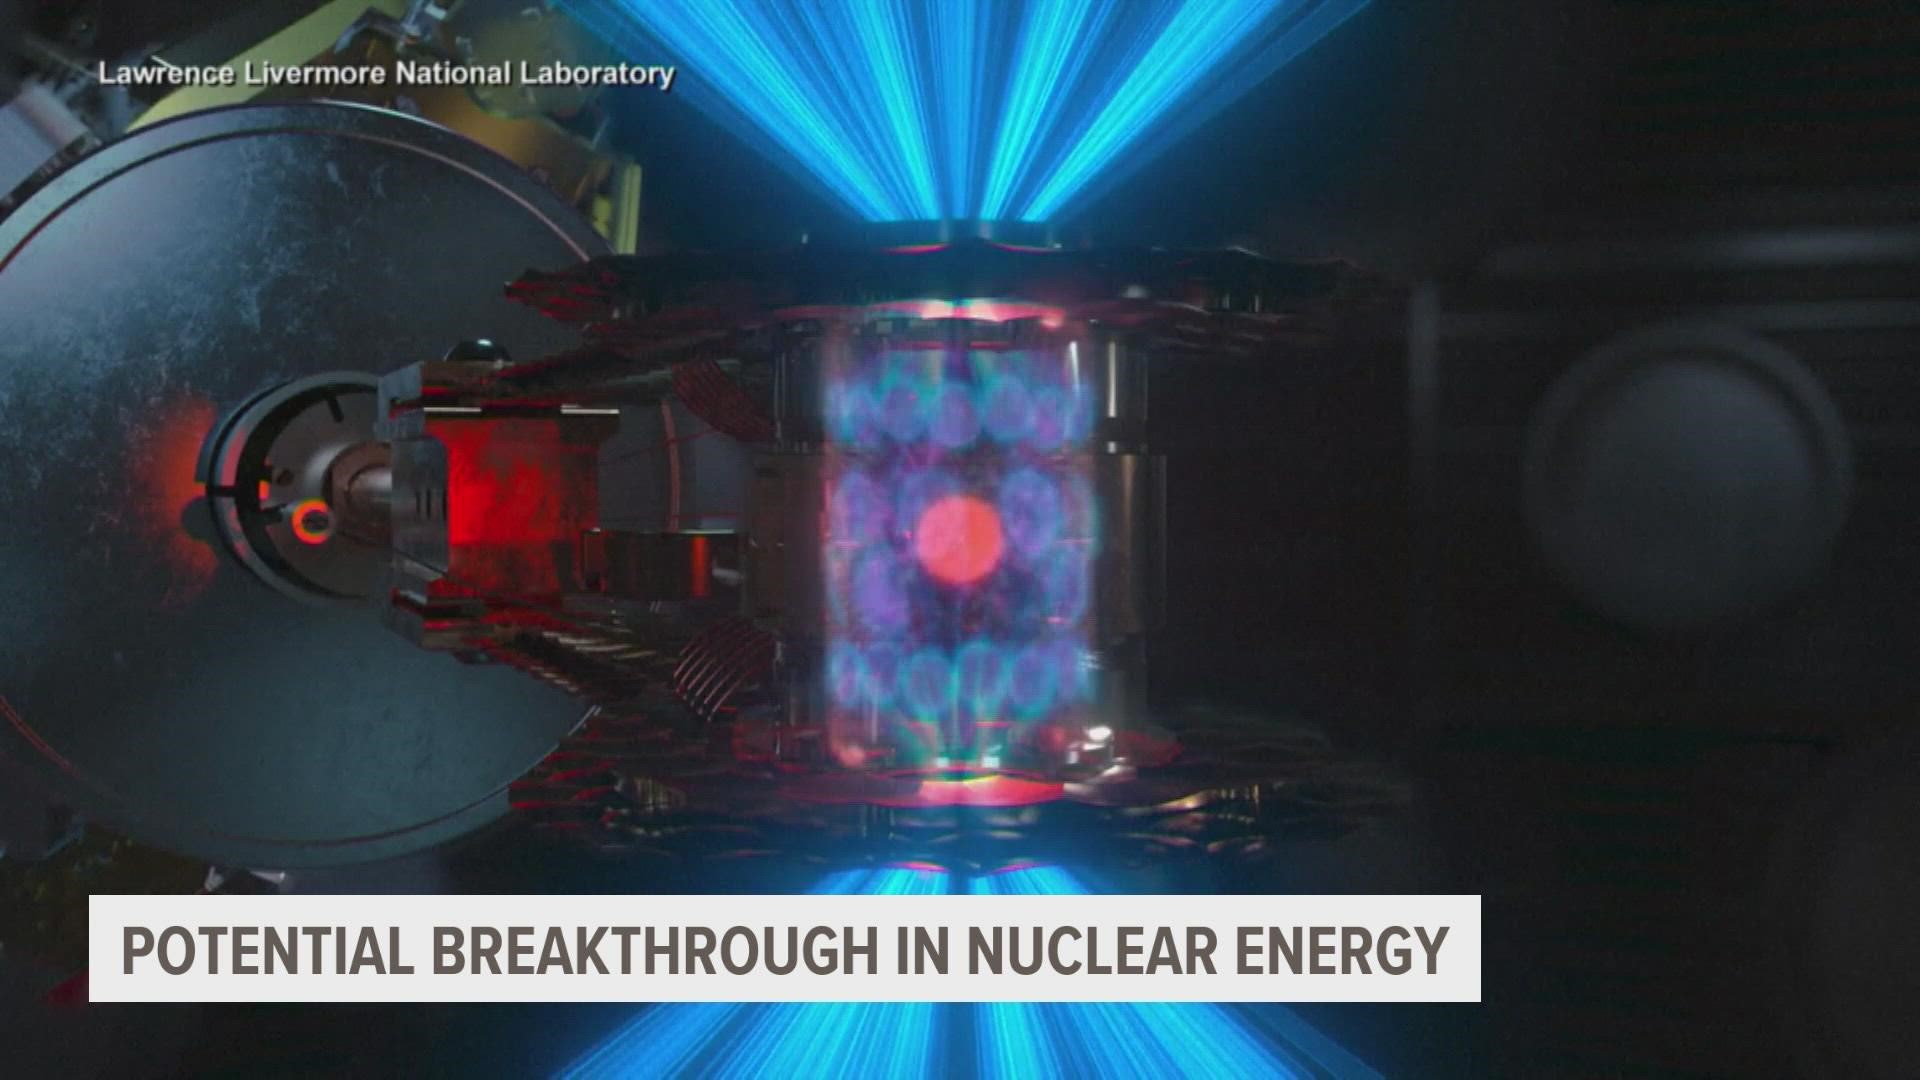 Producing energy that powers homes and businesses from fusion is still decades away. But researchers said it was a significant step nonetheless.